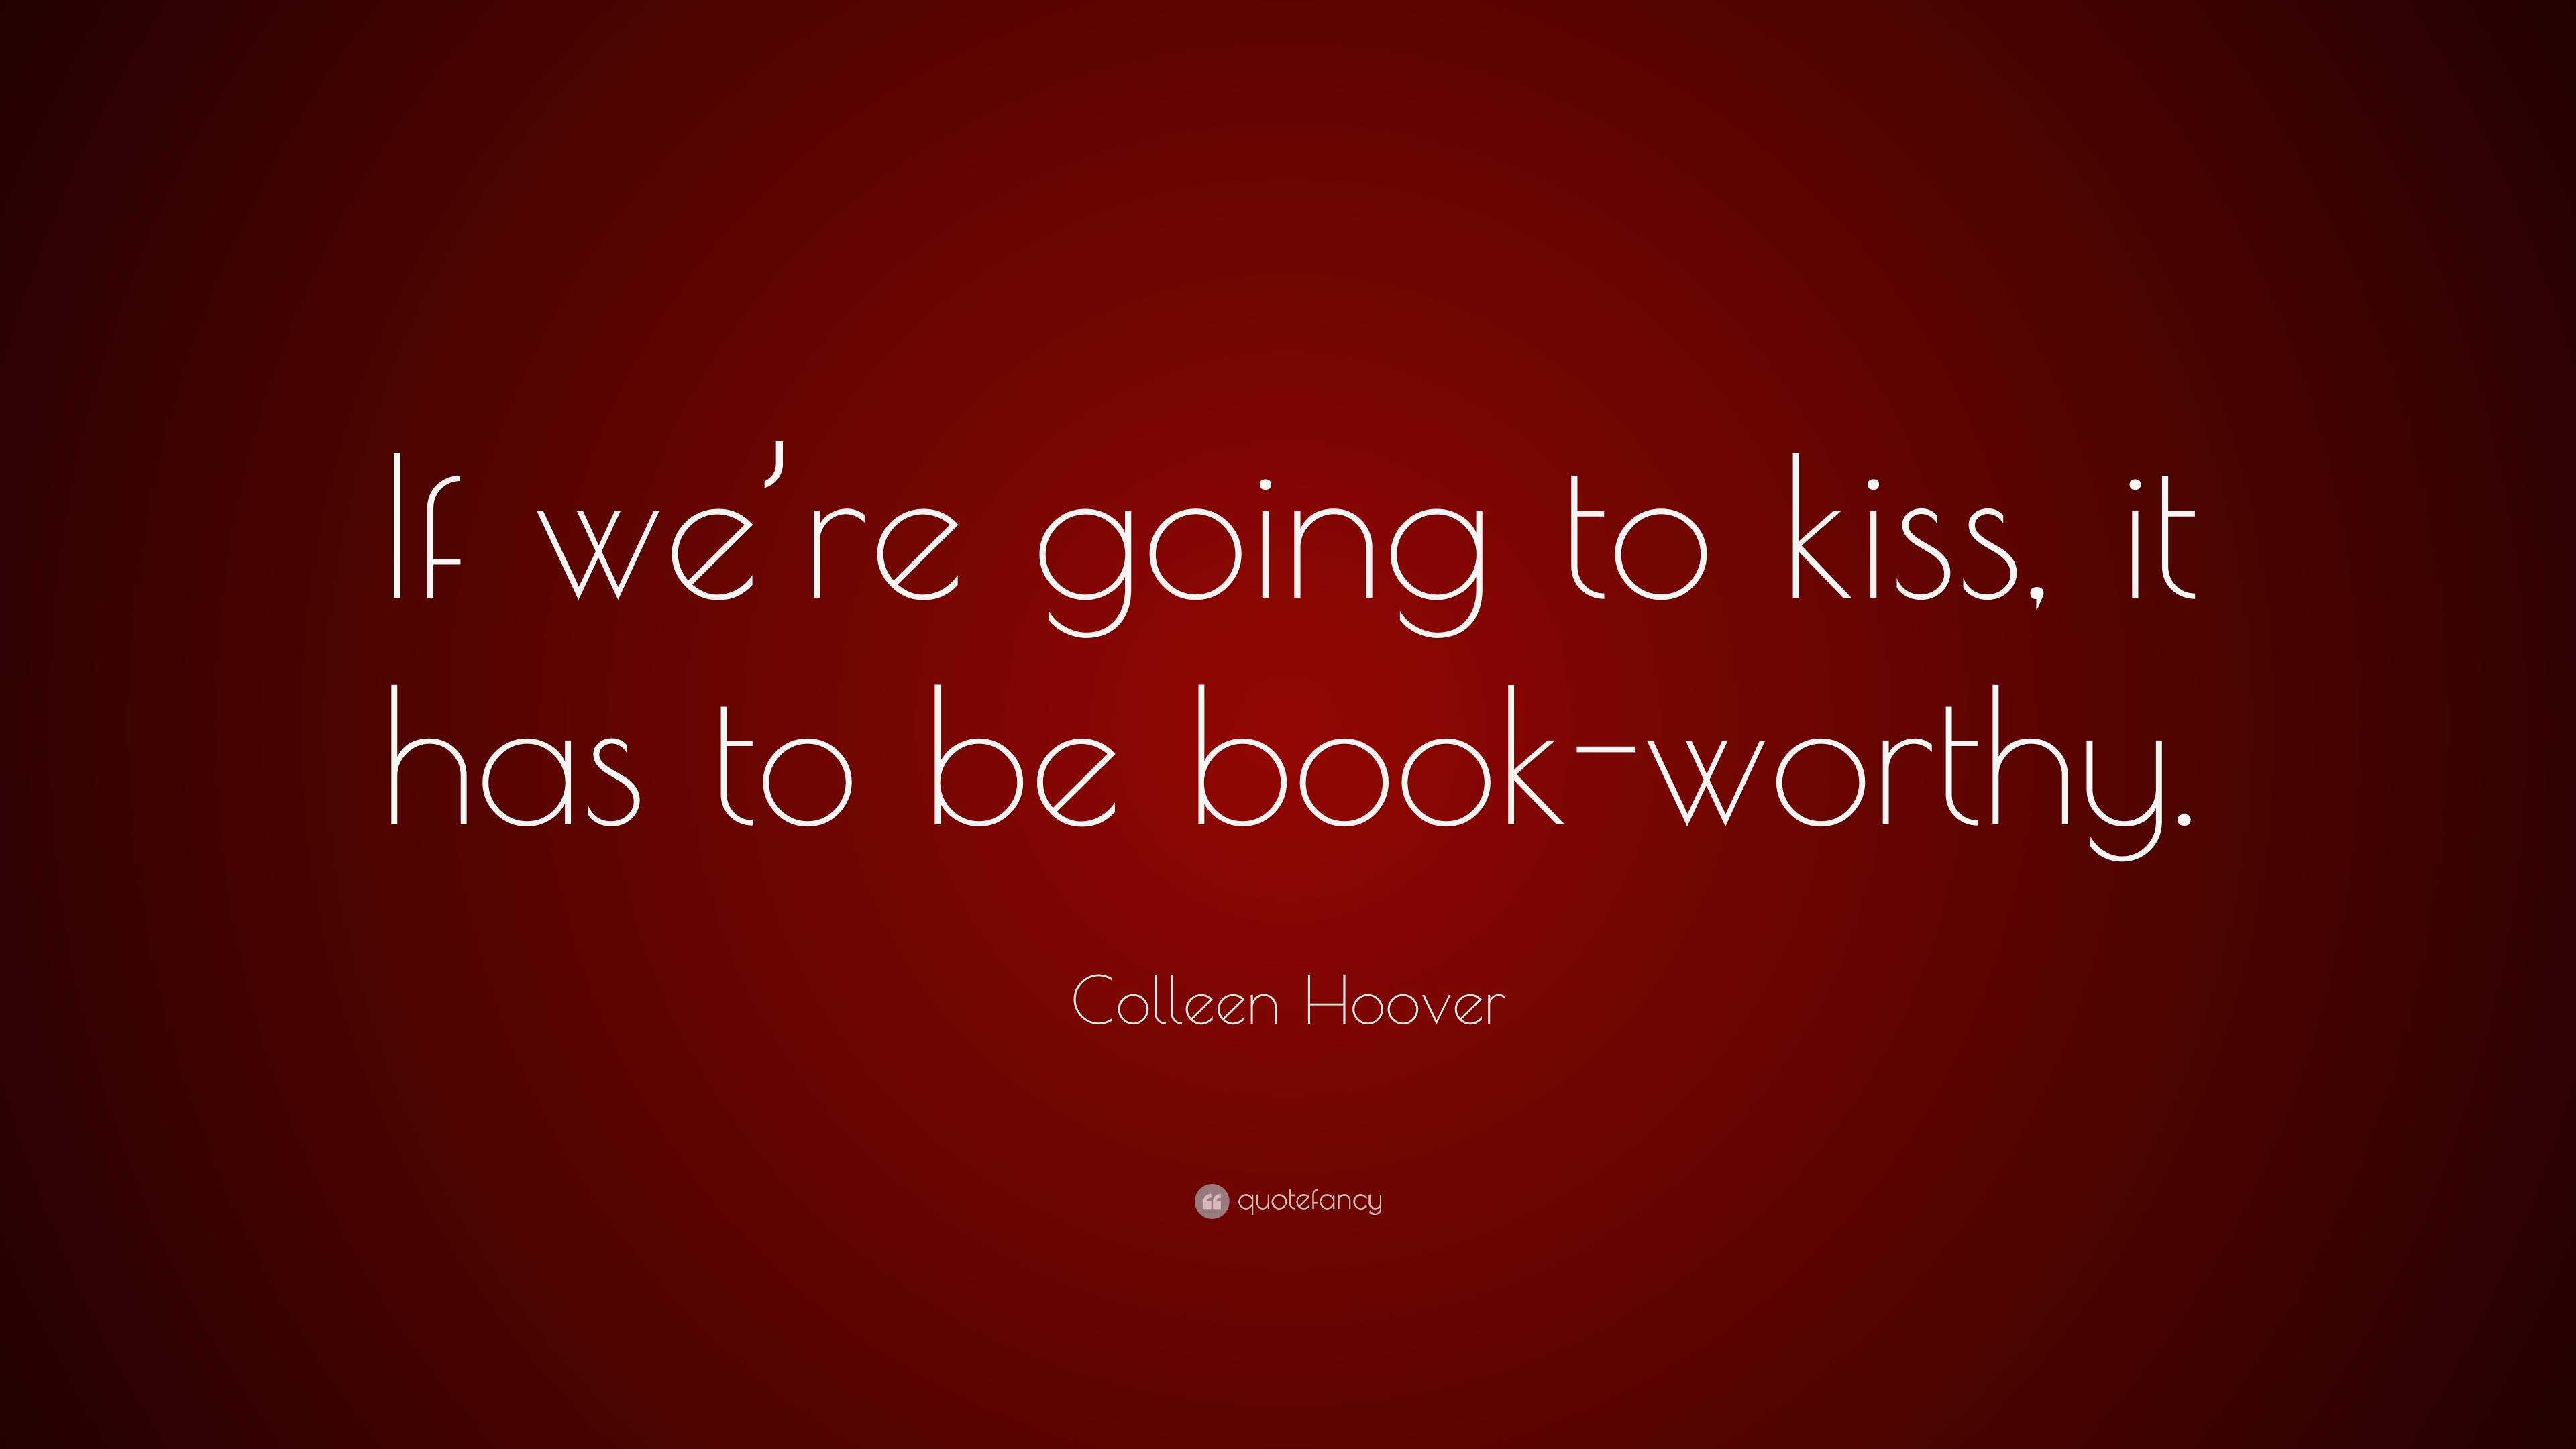 Colleen Hoover Quote: “But for the first time, I don't feel like the English  language has developed enough letters in the alphabet to adequatel”